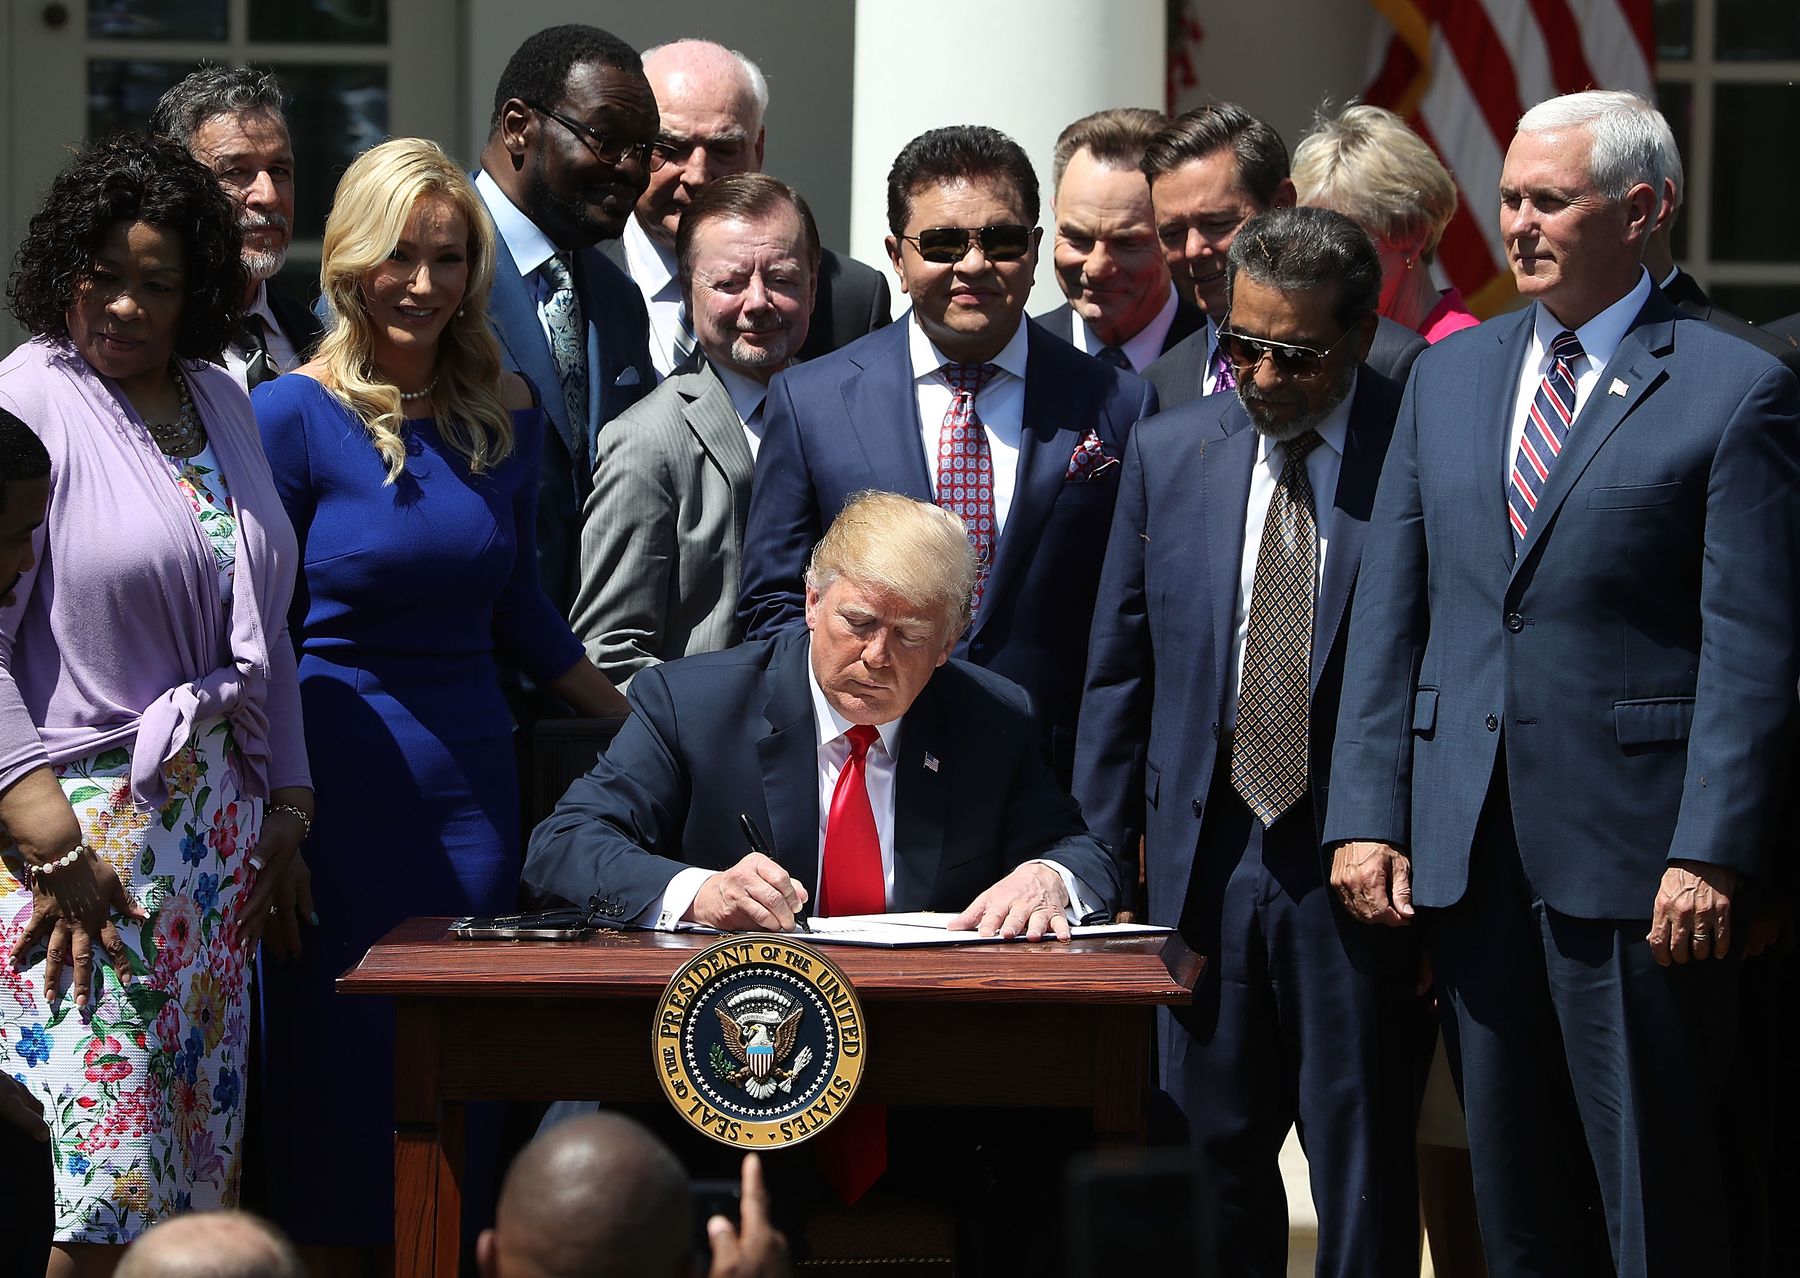 President Trump Signs Executive Order on Faith Initiatives on This Year's National Day of Prayer